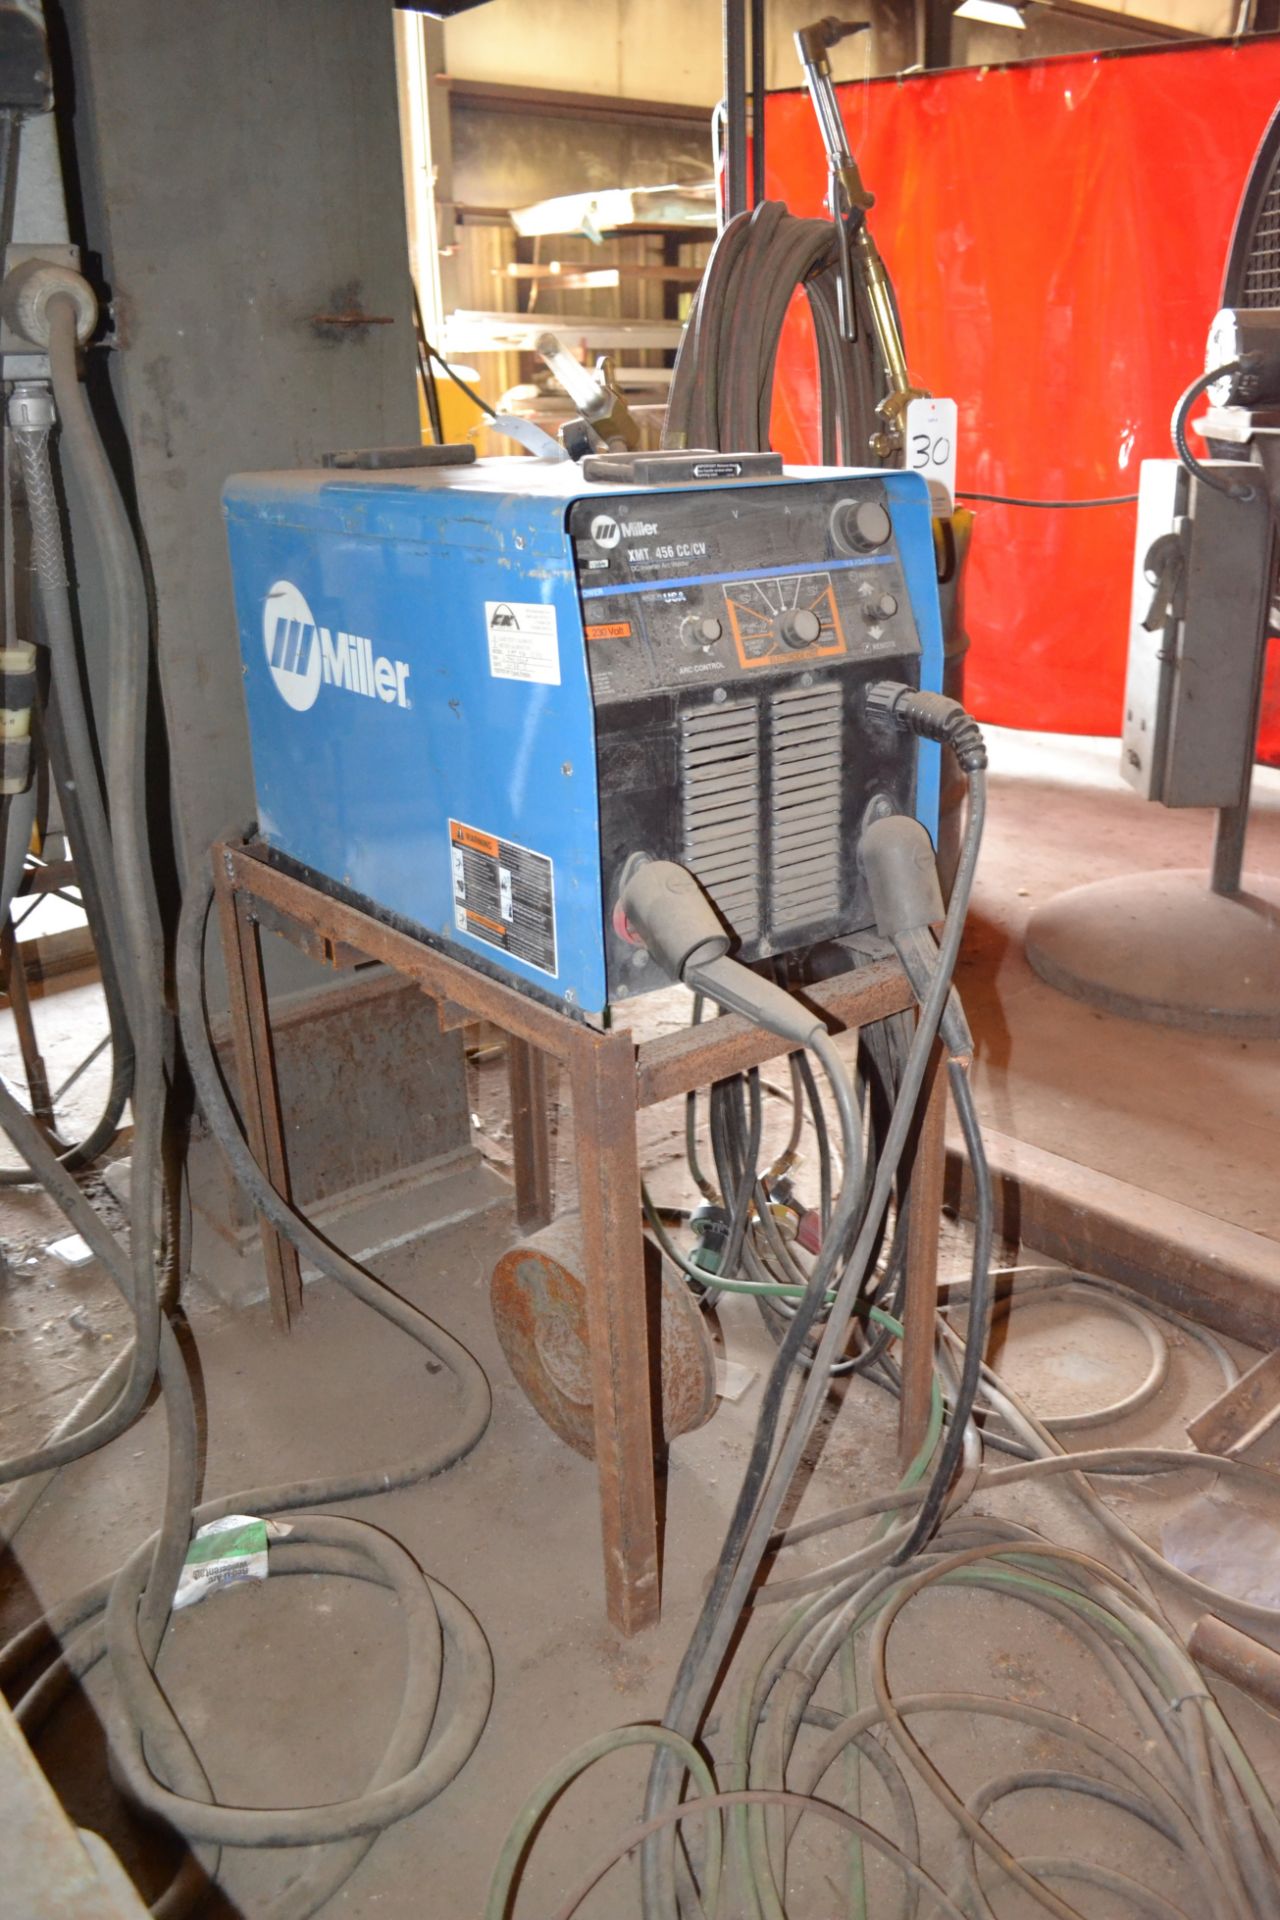 Miller Model XMT456 CC/CV DC Inverter Arc Welder, S/N LJ441020A; With 24A Wire Feed - Image 8 of 8